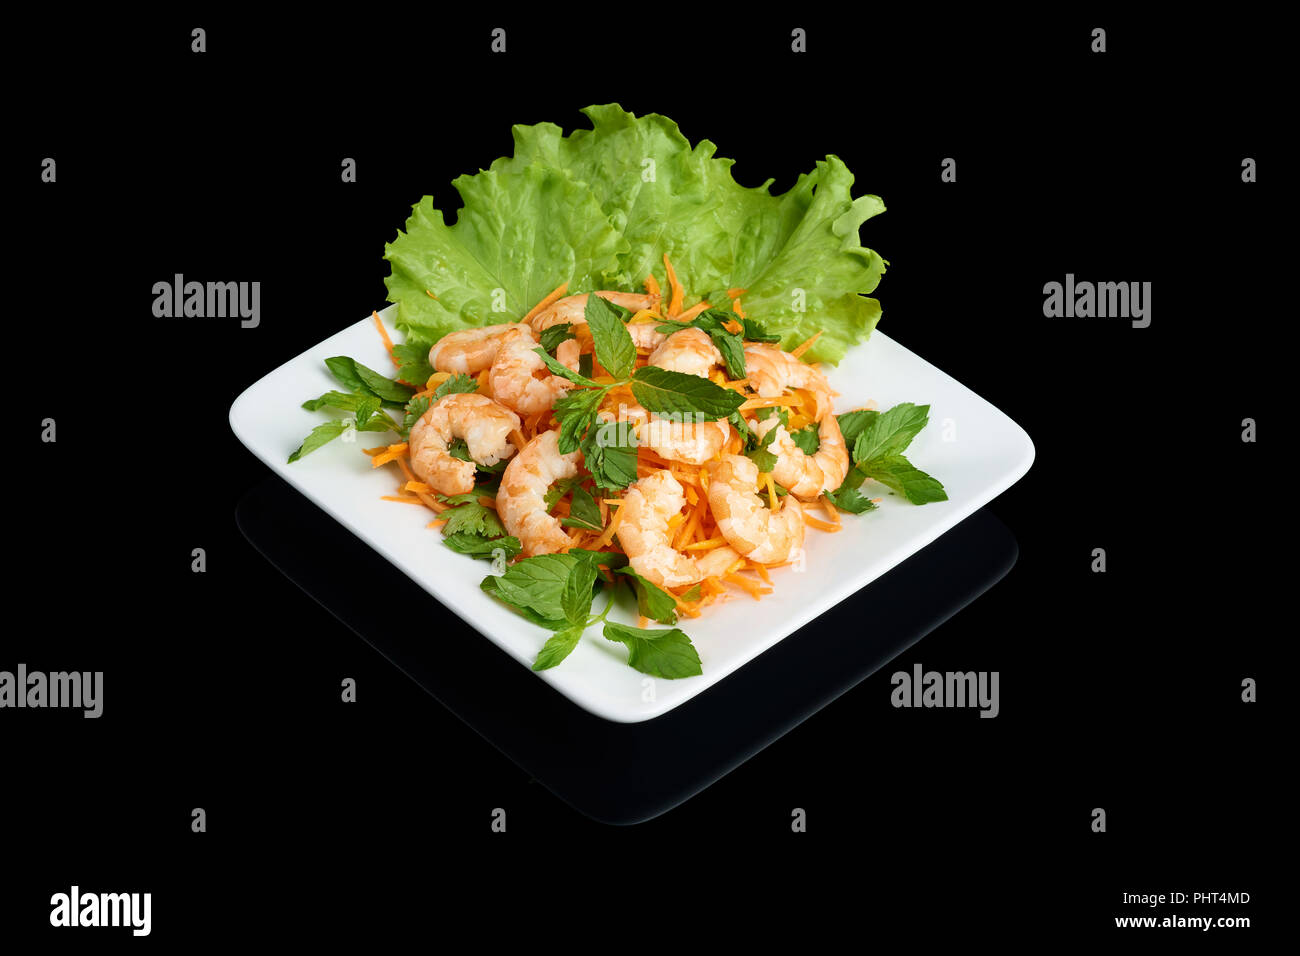 Vietnamese cuisine Mango salad with shrimps with vegetables on rectangular white plate isolated on black reflective background Stock Photo